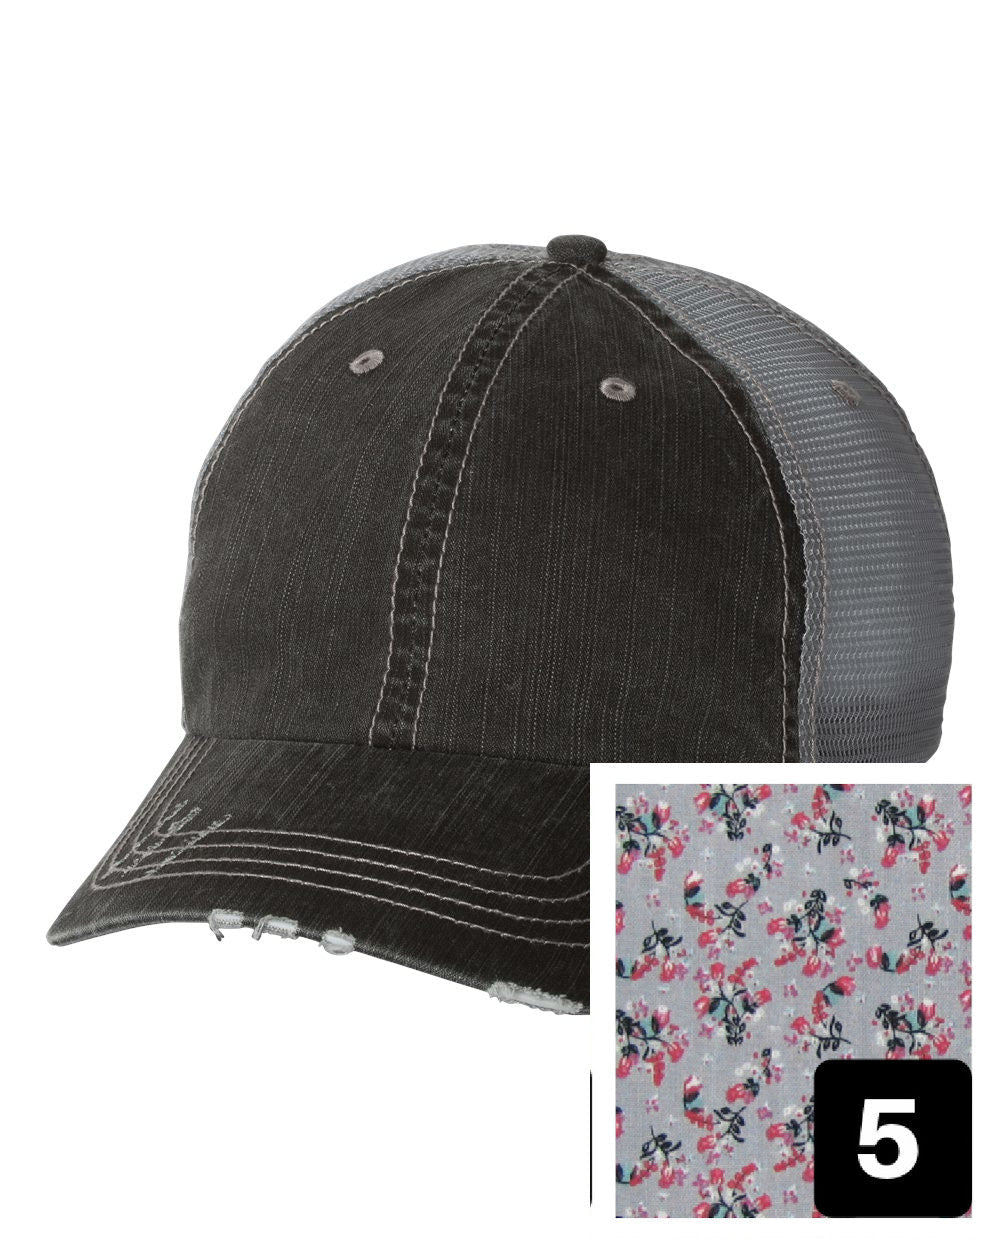 gray distressed trucker hat with purple and pink floral fabric state of South Carolina